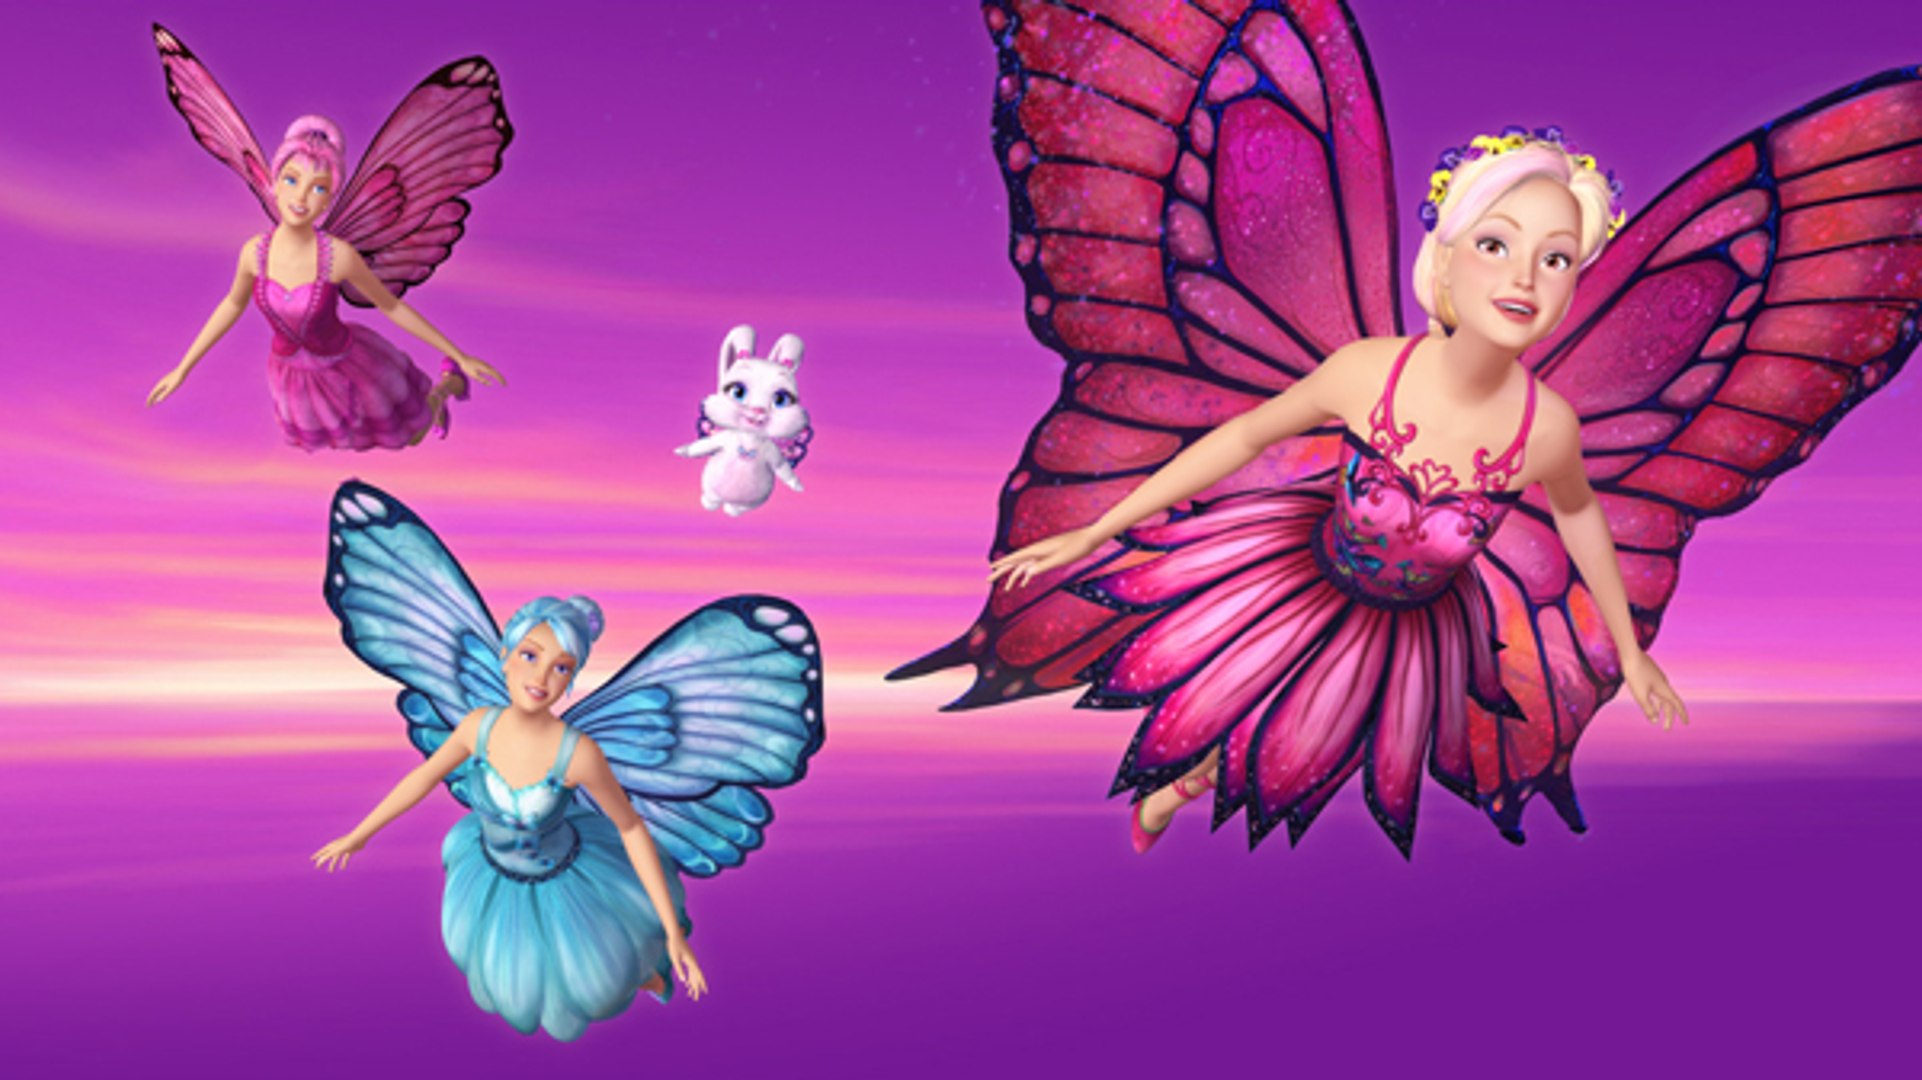 Barbie Mariposa Complete Cinema in Hindi/English Part - I - video  Dailymotion